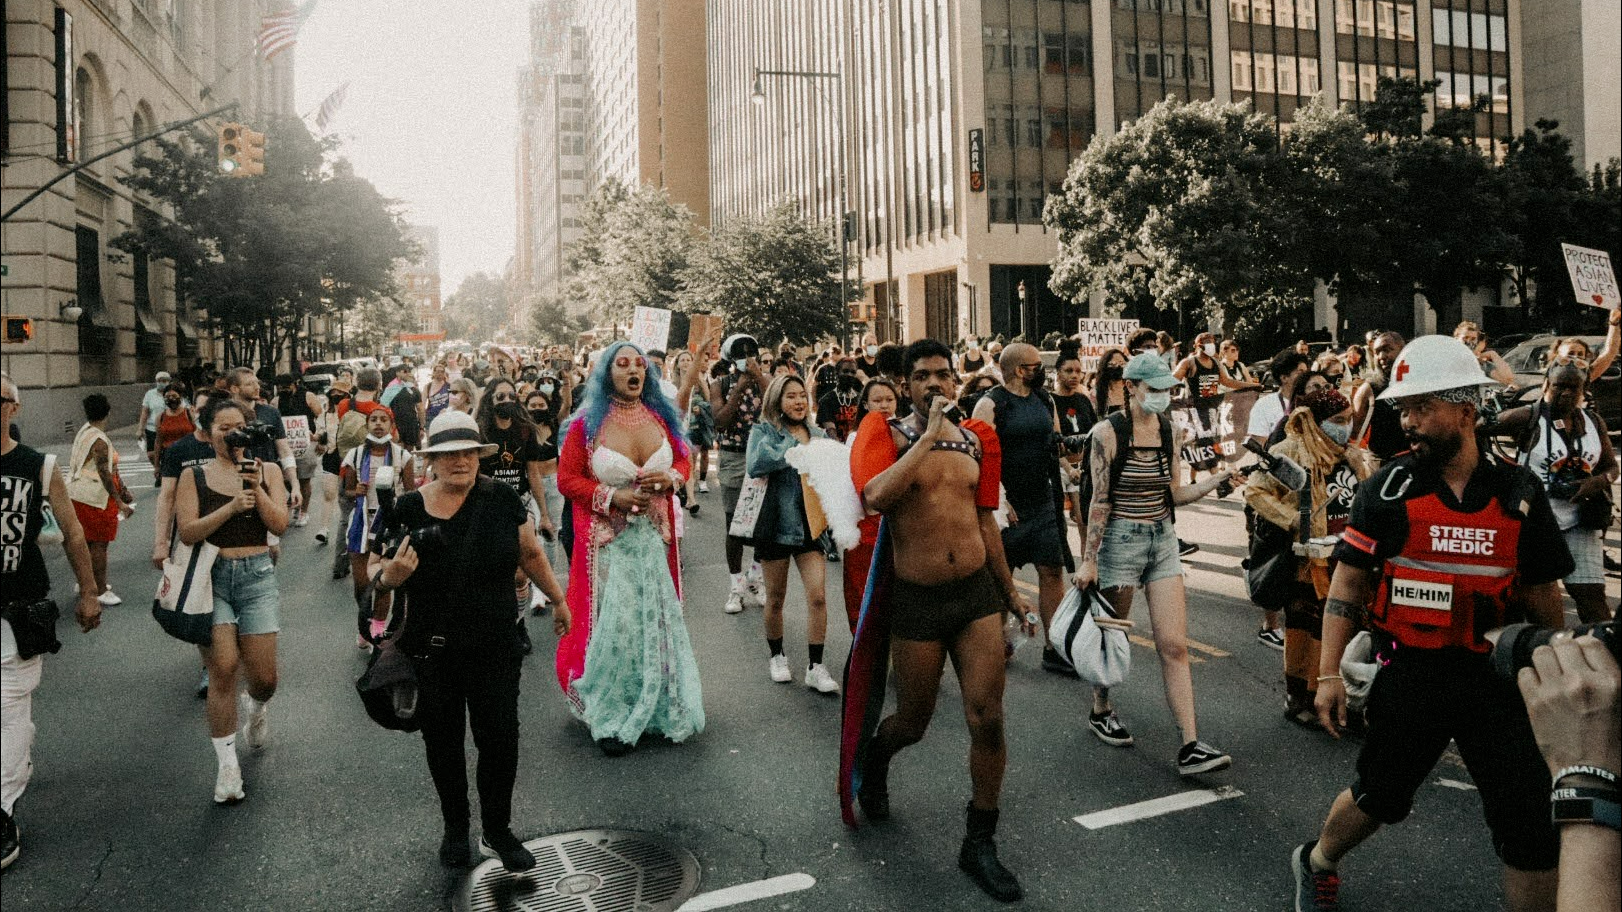 Black, Asian, and Blasian people marching together to celebrate Pride